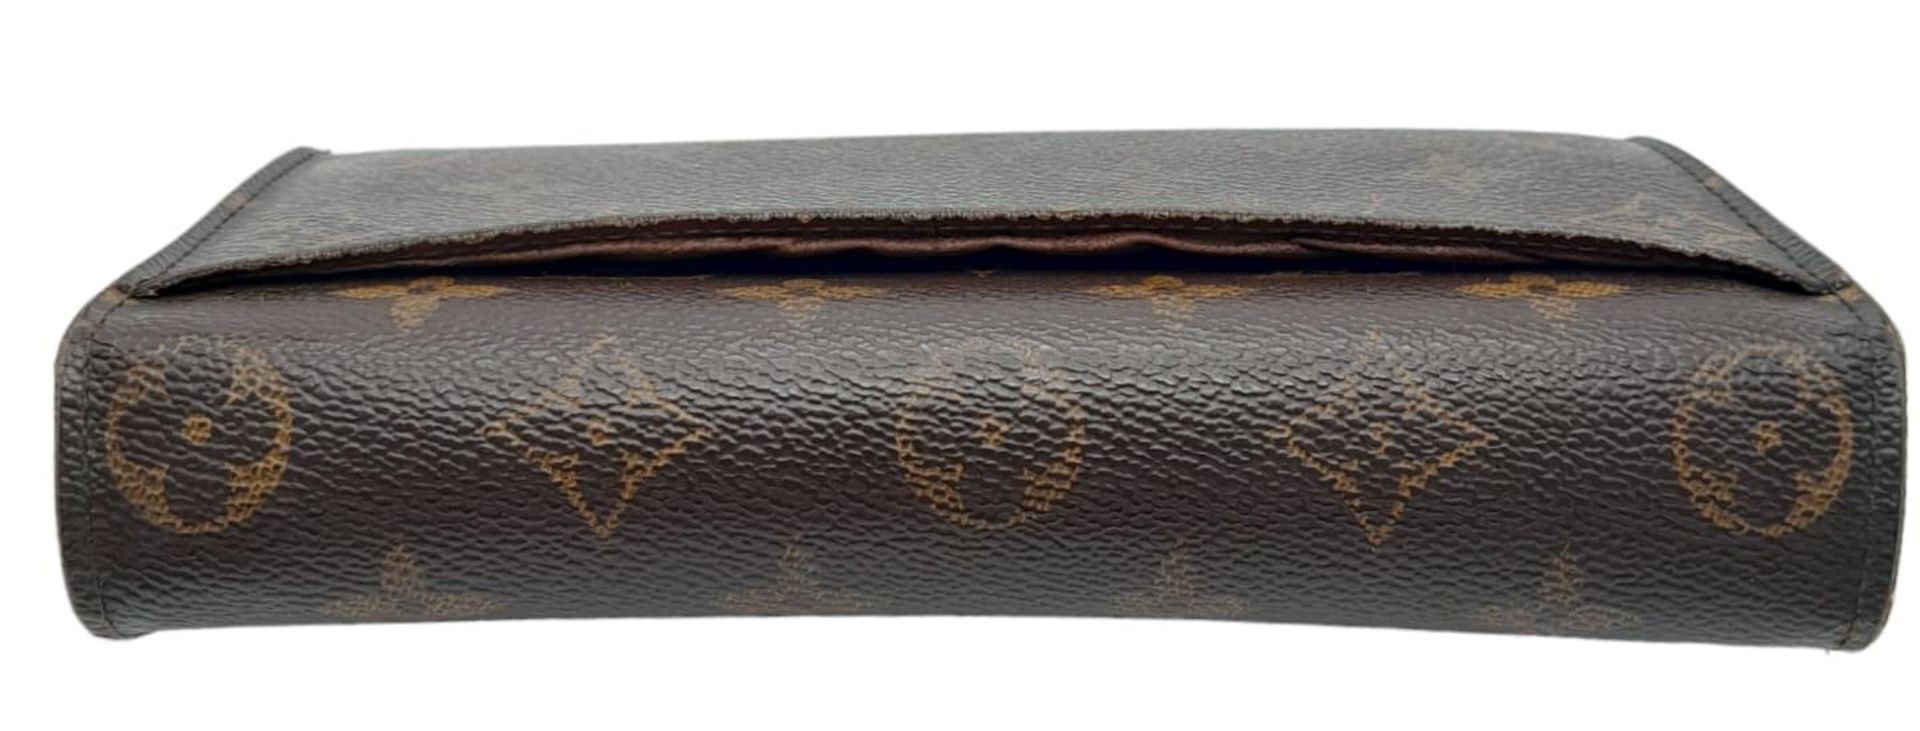 A Louis Vuitton Monogram Wallet. Leather exterior with an open compartment on back and press stud - Bild 4 aus 10